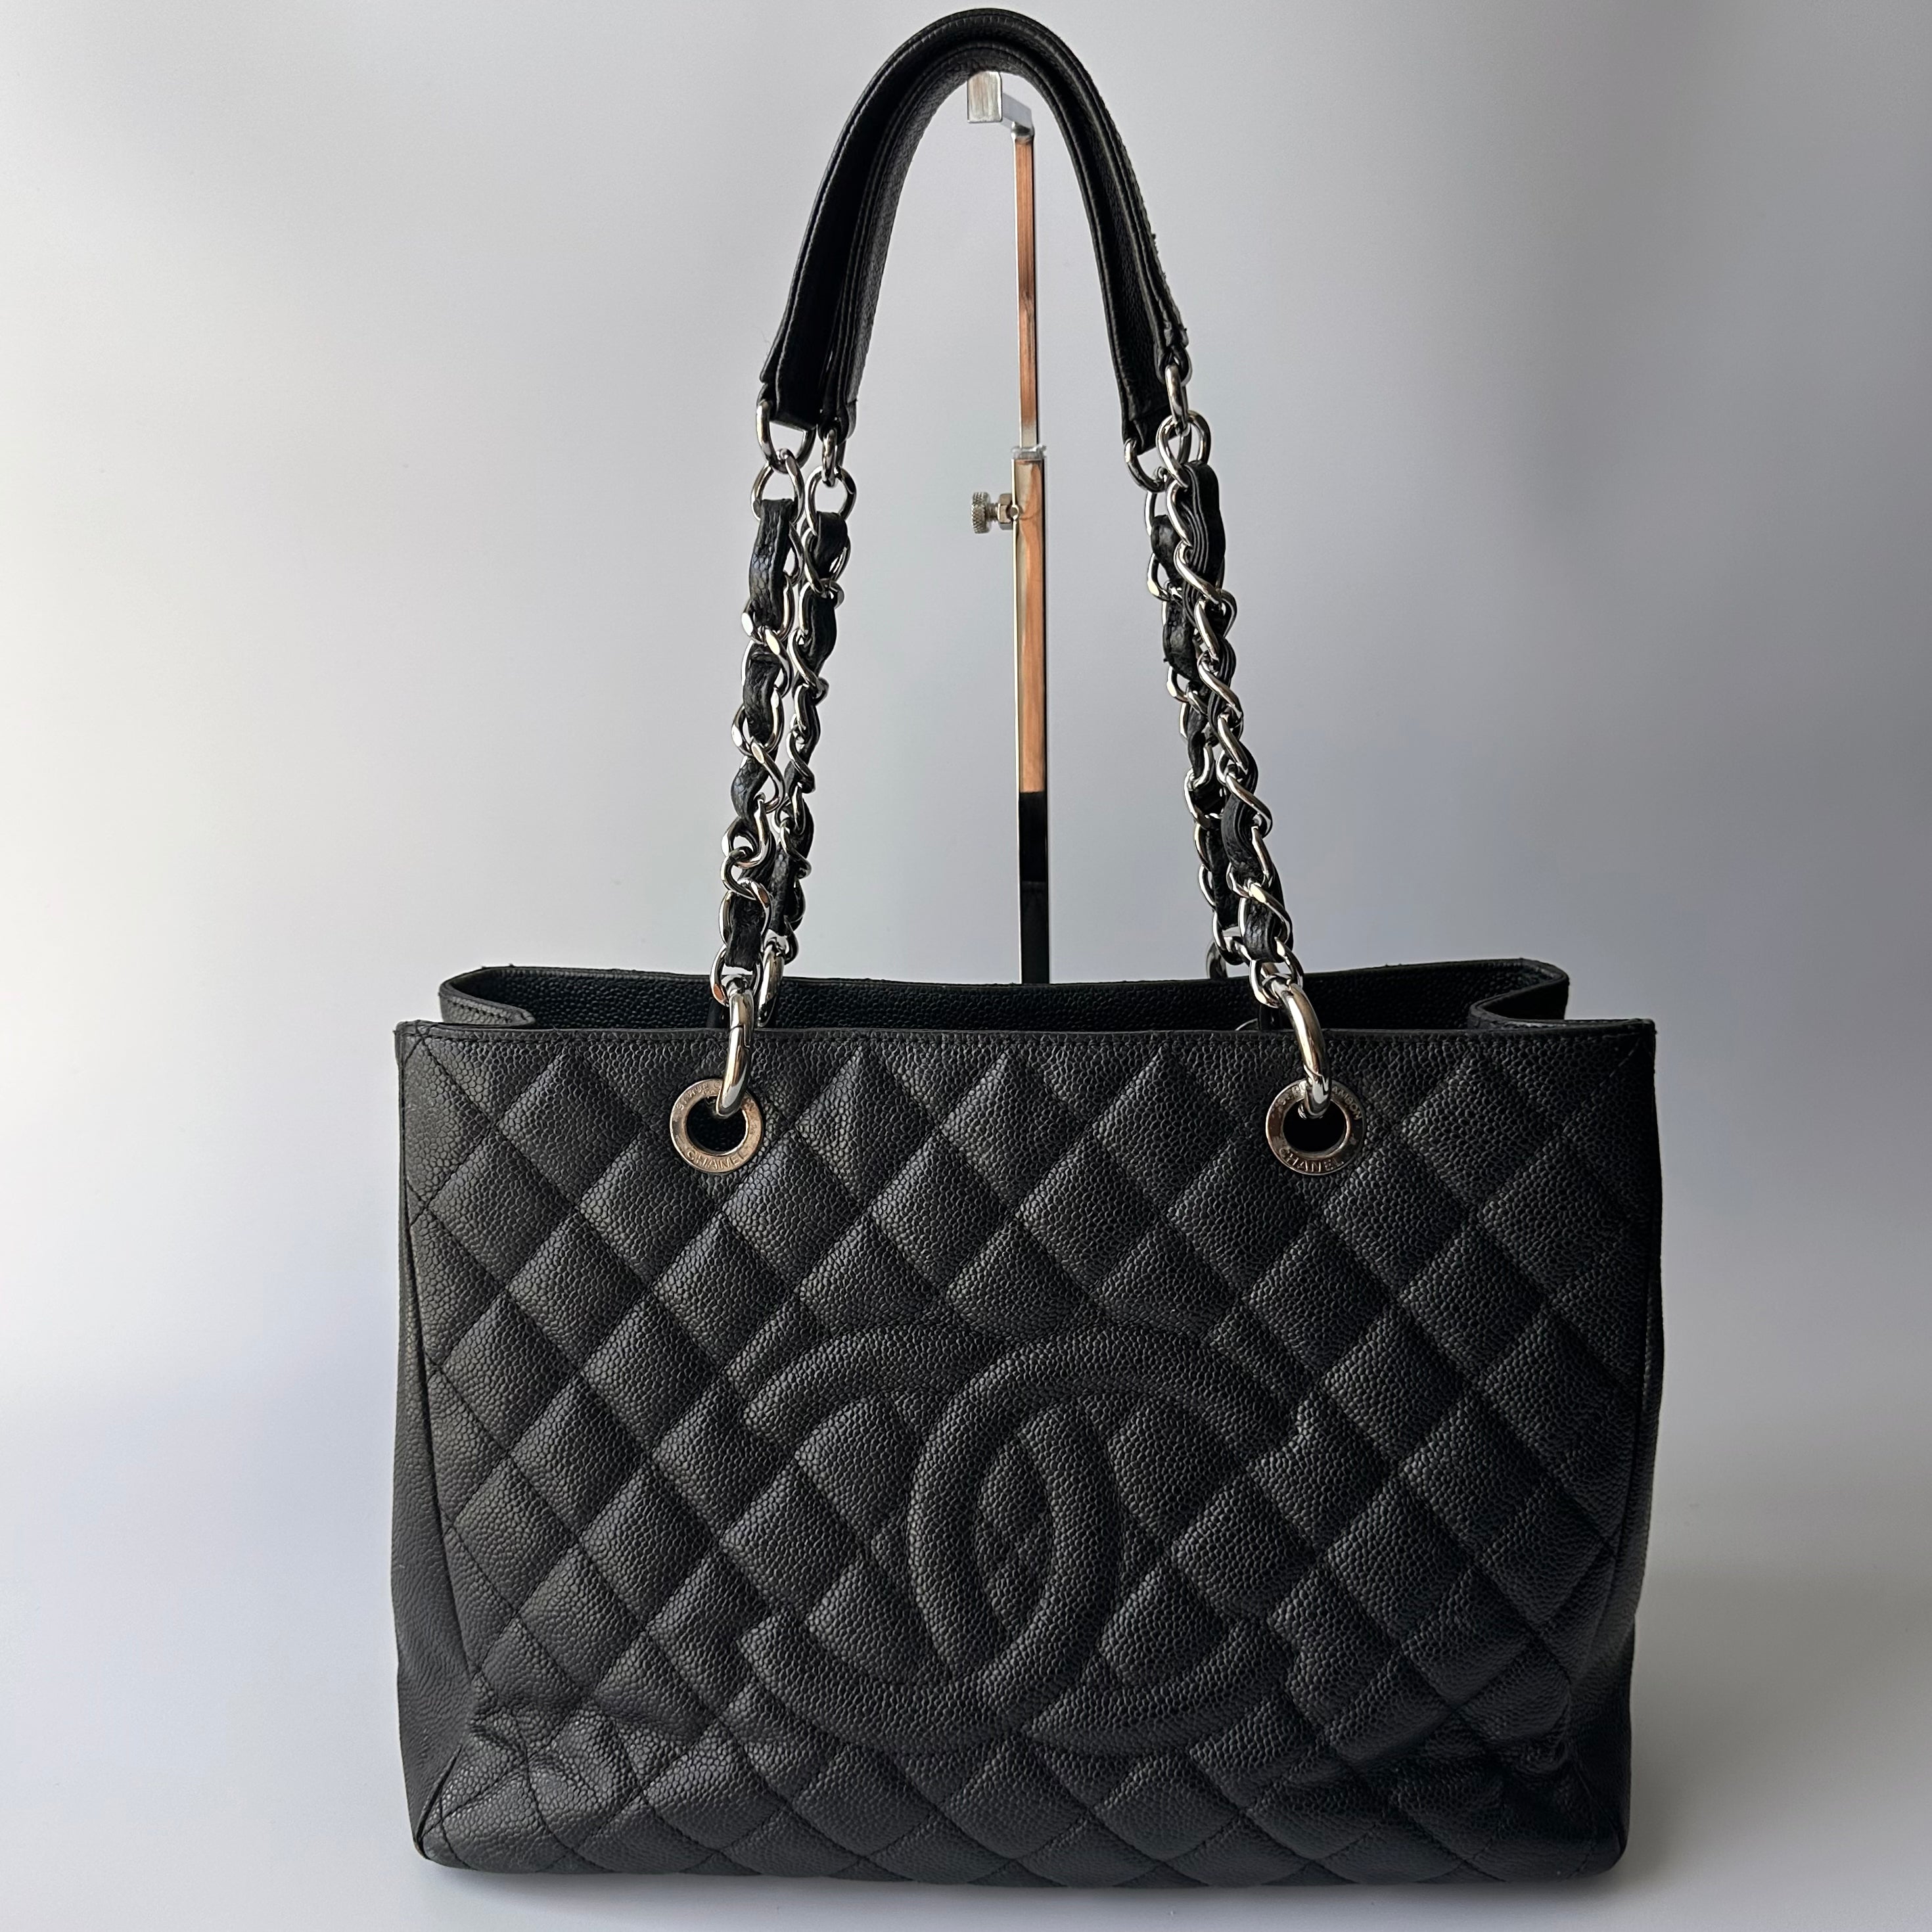 CHANEL CHANEL GST Large Bags & Handbags for Women, Authenticity Guaranteed